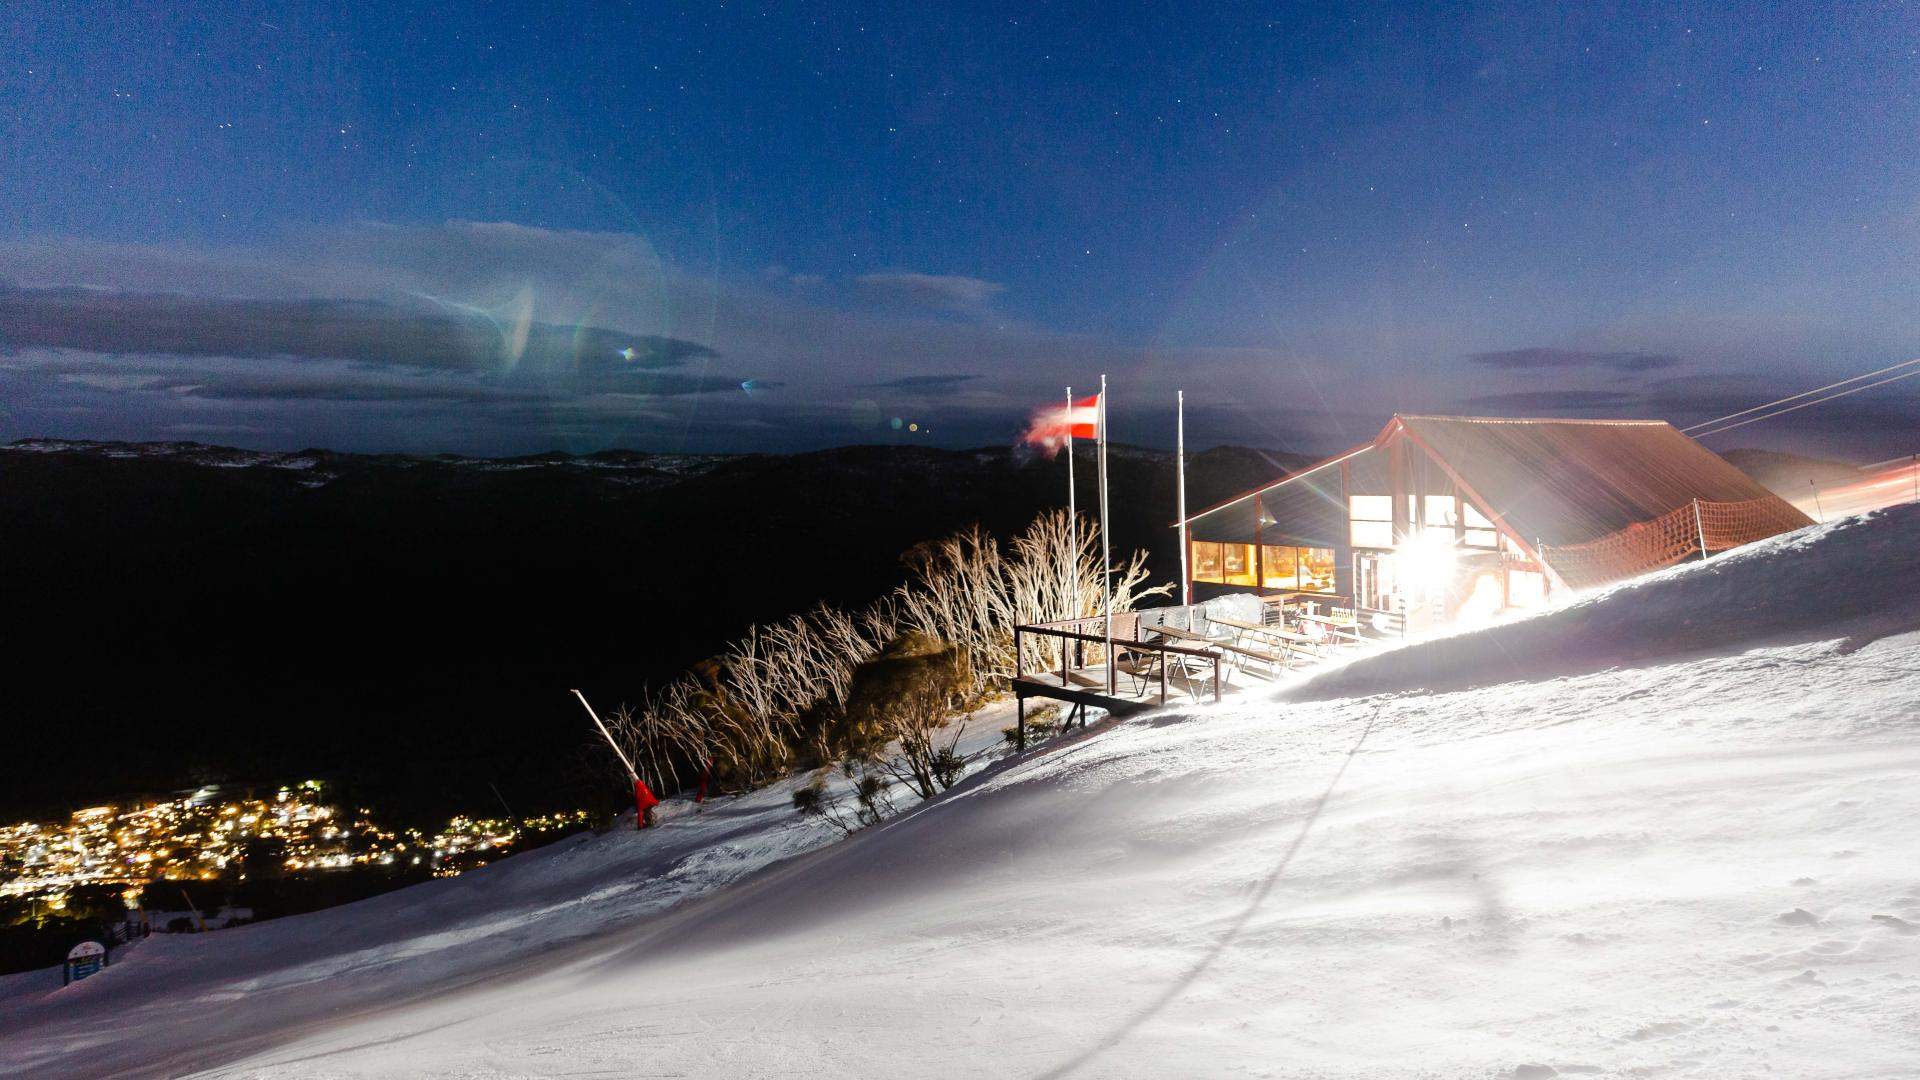 Thredbo's 2021 Winter Season Will Include Sunrise Ski Sessions and Feasts Overlooking the Village